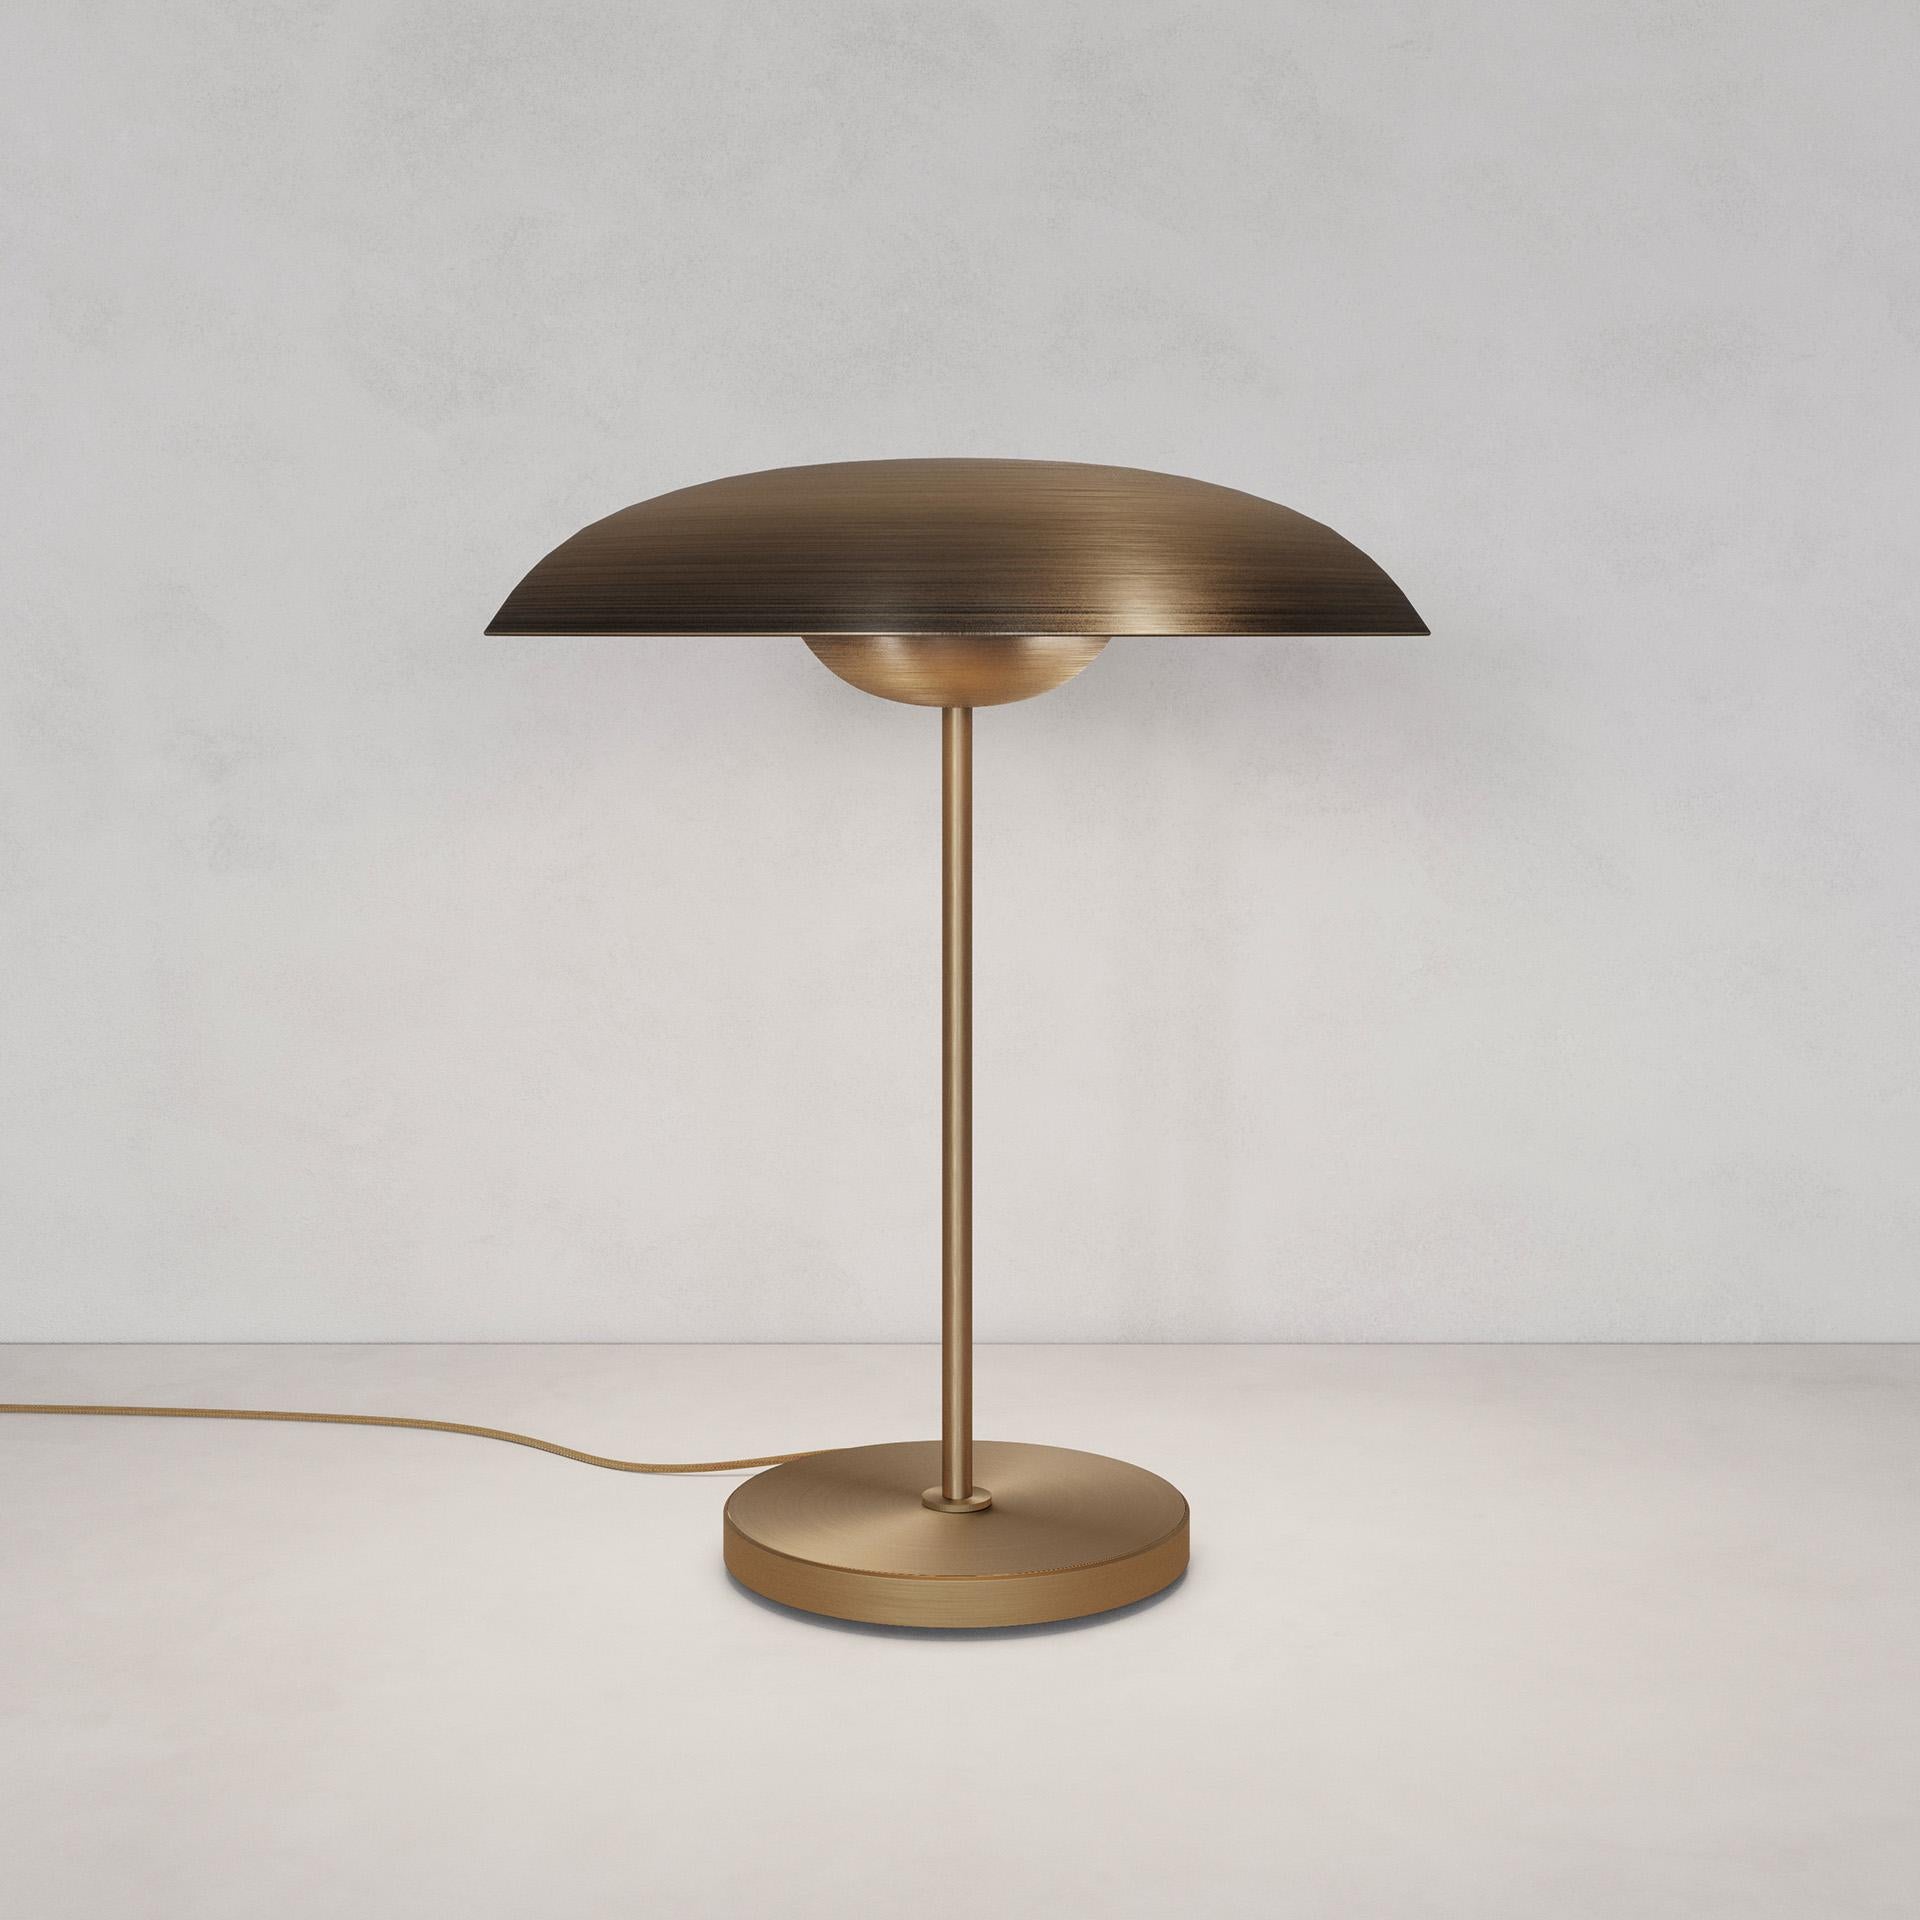 Solstice Ore Table Lamp by Atelier001
Dimensions: D40 x H47 cm
Materials: Shade Bronze gradient patinated brass
Framework Satin brass
Also Available: In different finishes.

All our lamps can be wired according to each country. If sold to the USA it